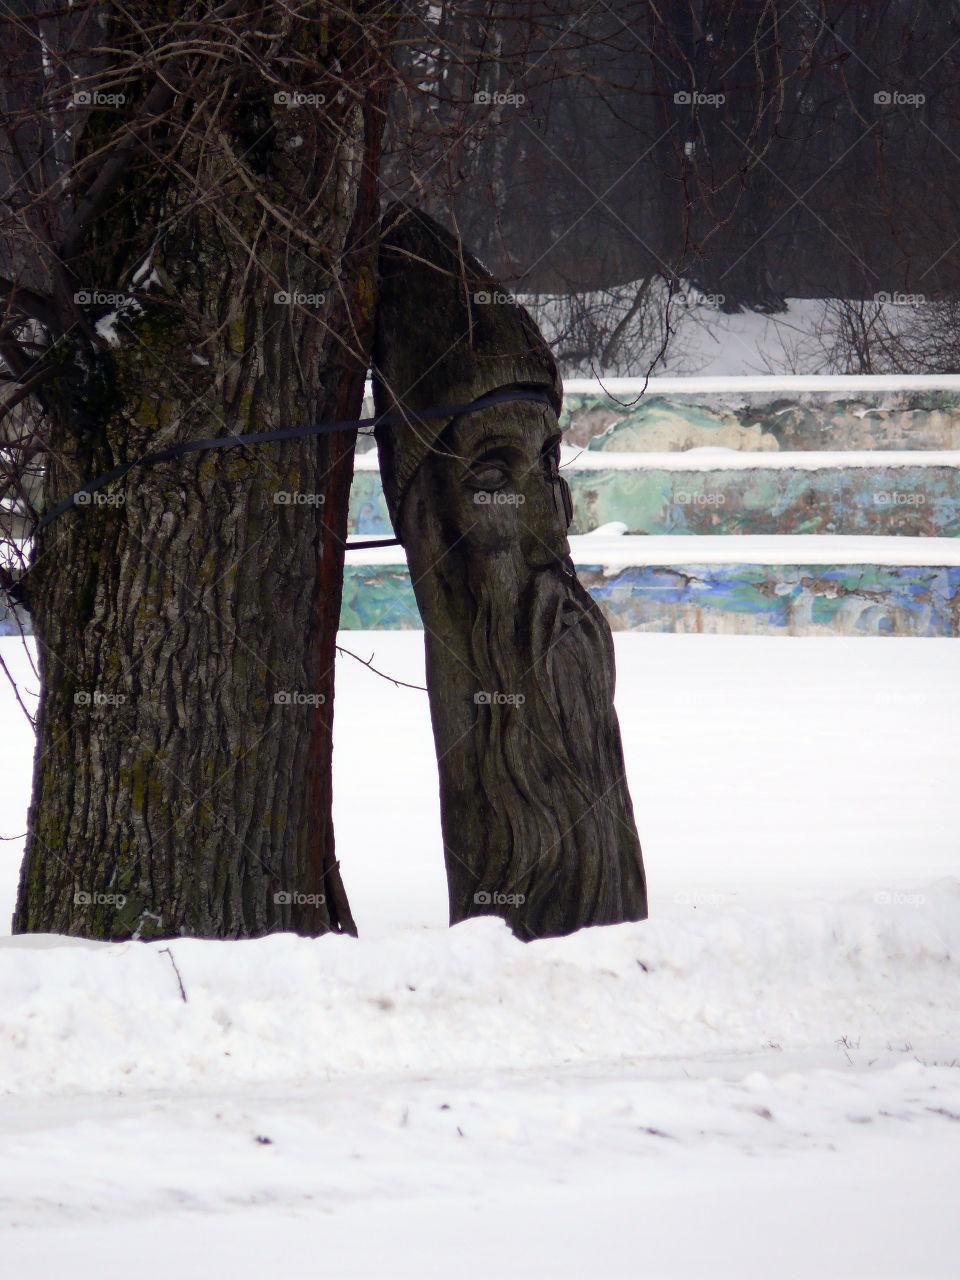 Wooden sculpture leaning on tree trunk during winter in Jūrmala, Latvia.